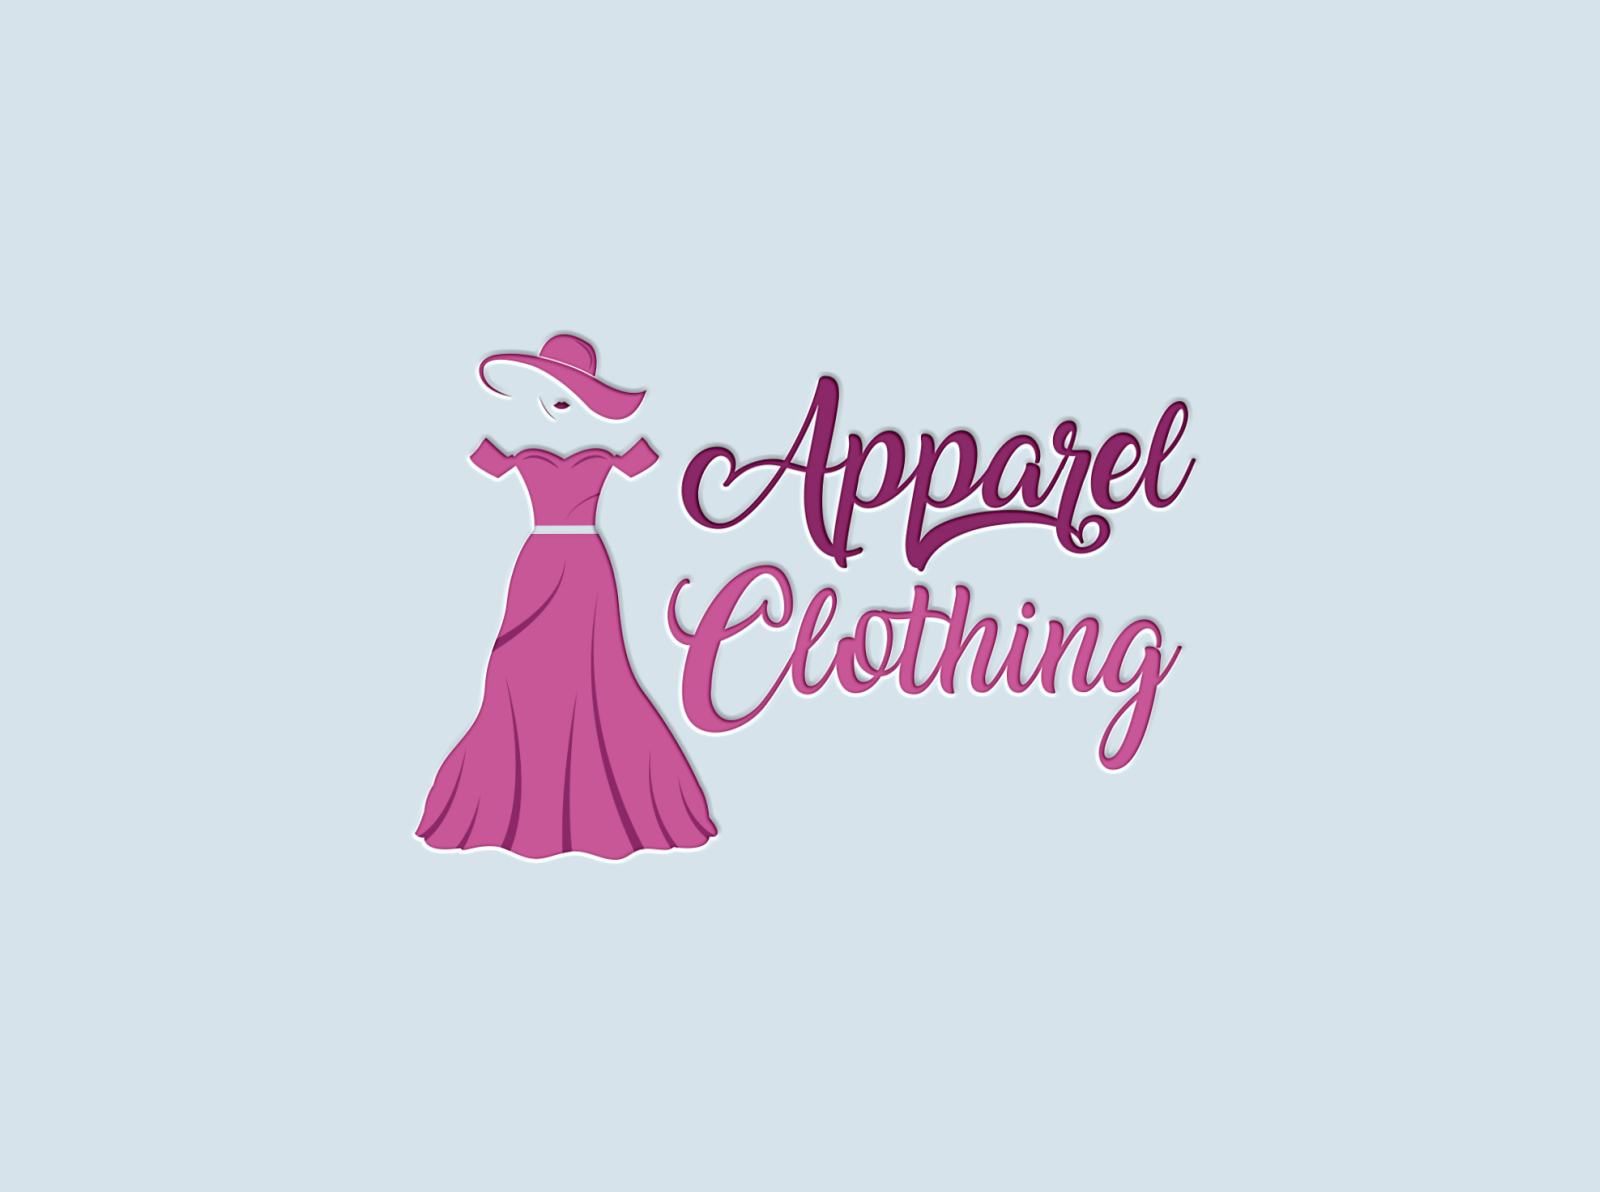 apparel-clothing-logo-by-trusted-it-institute-on-dribbble